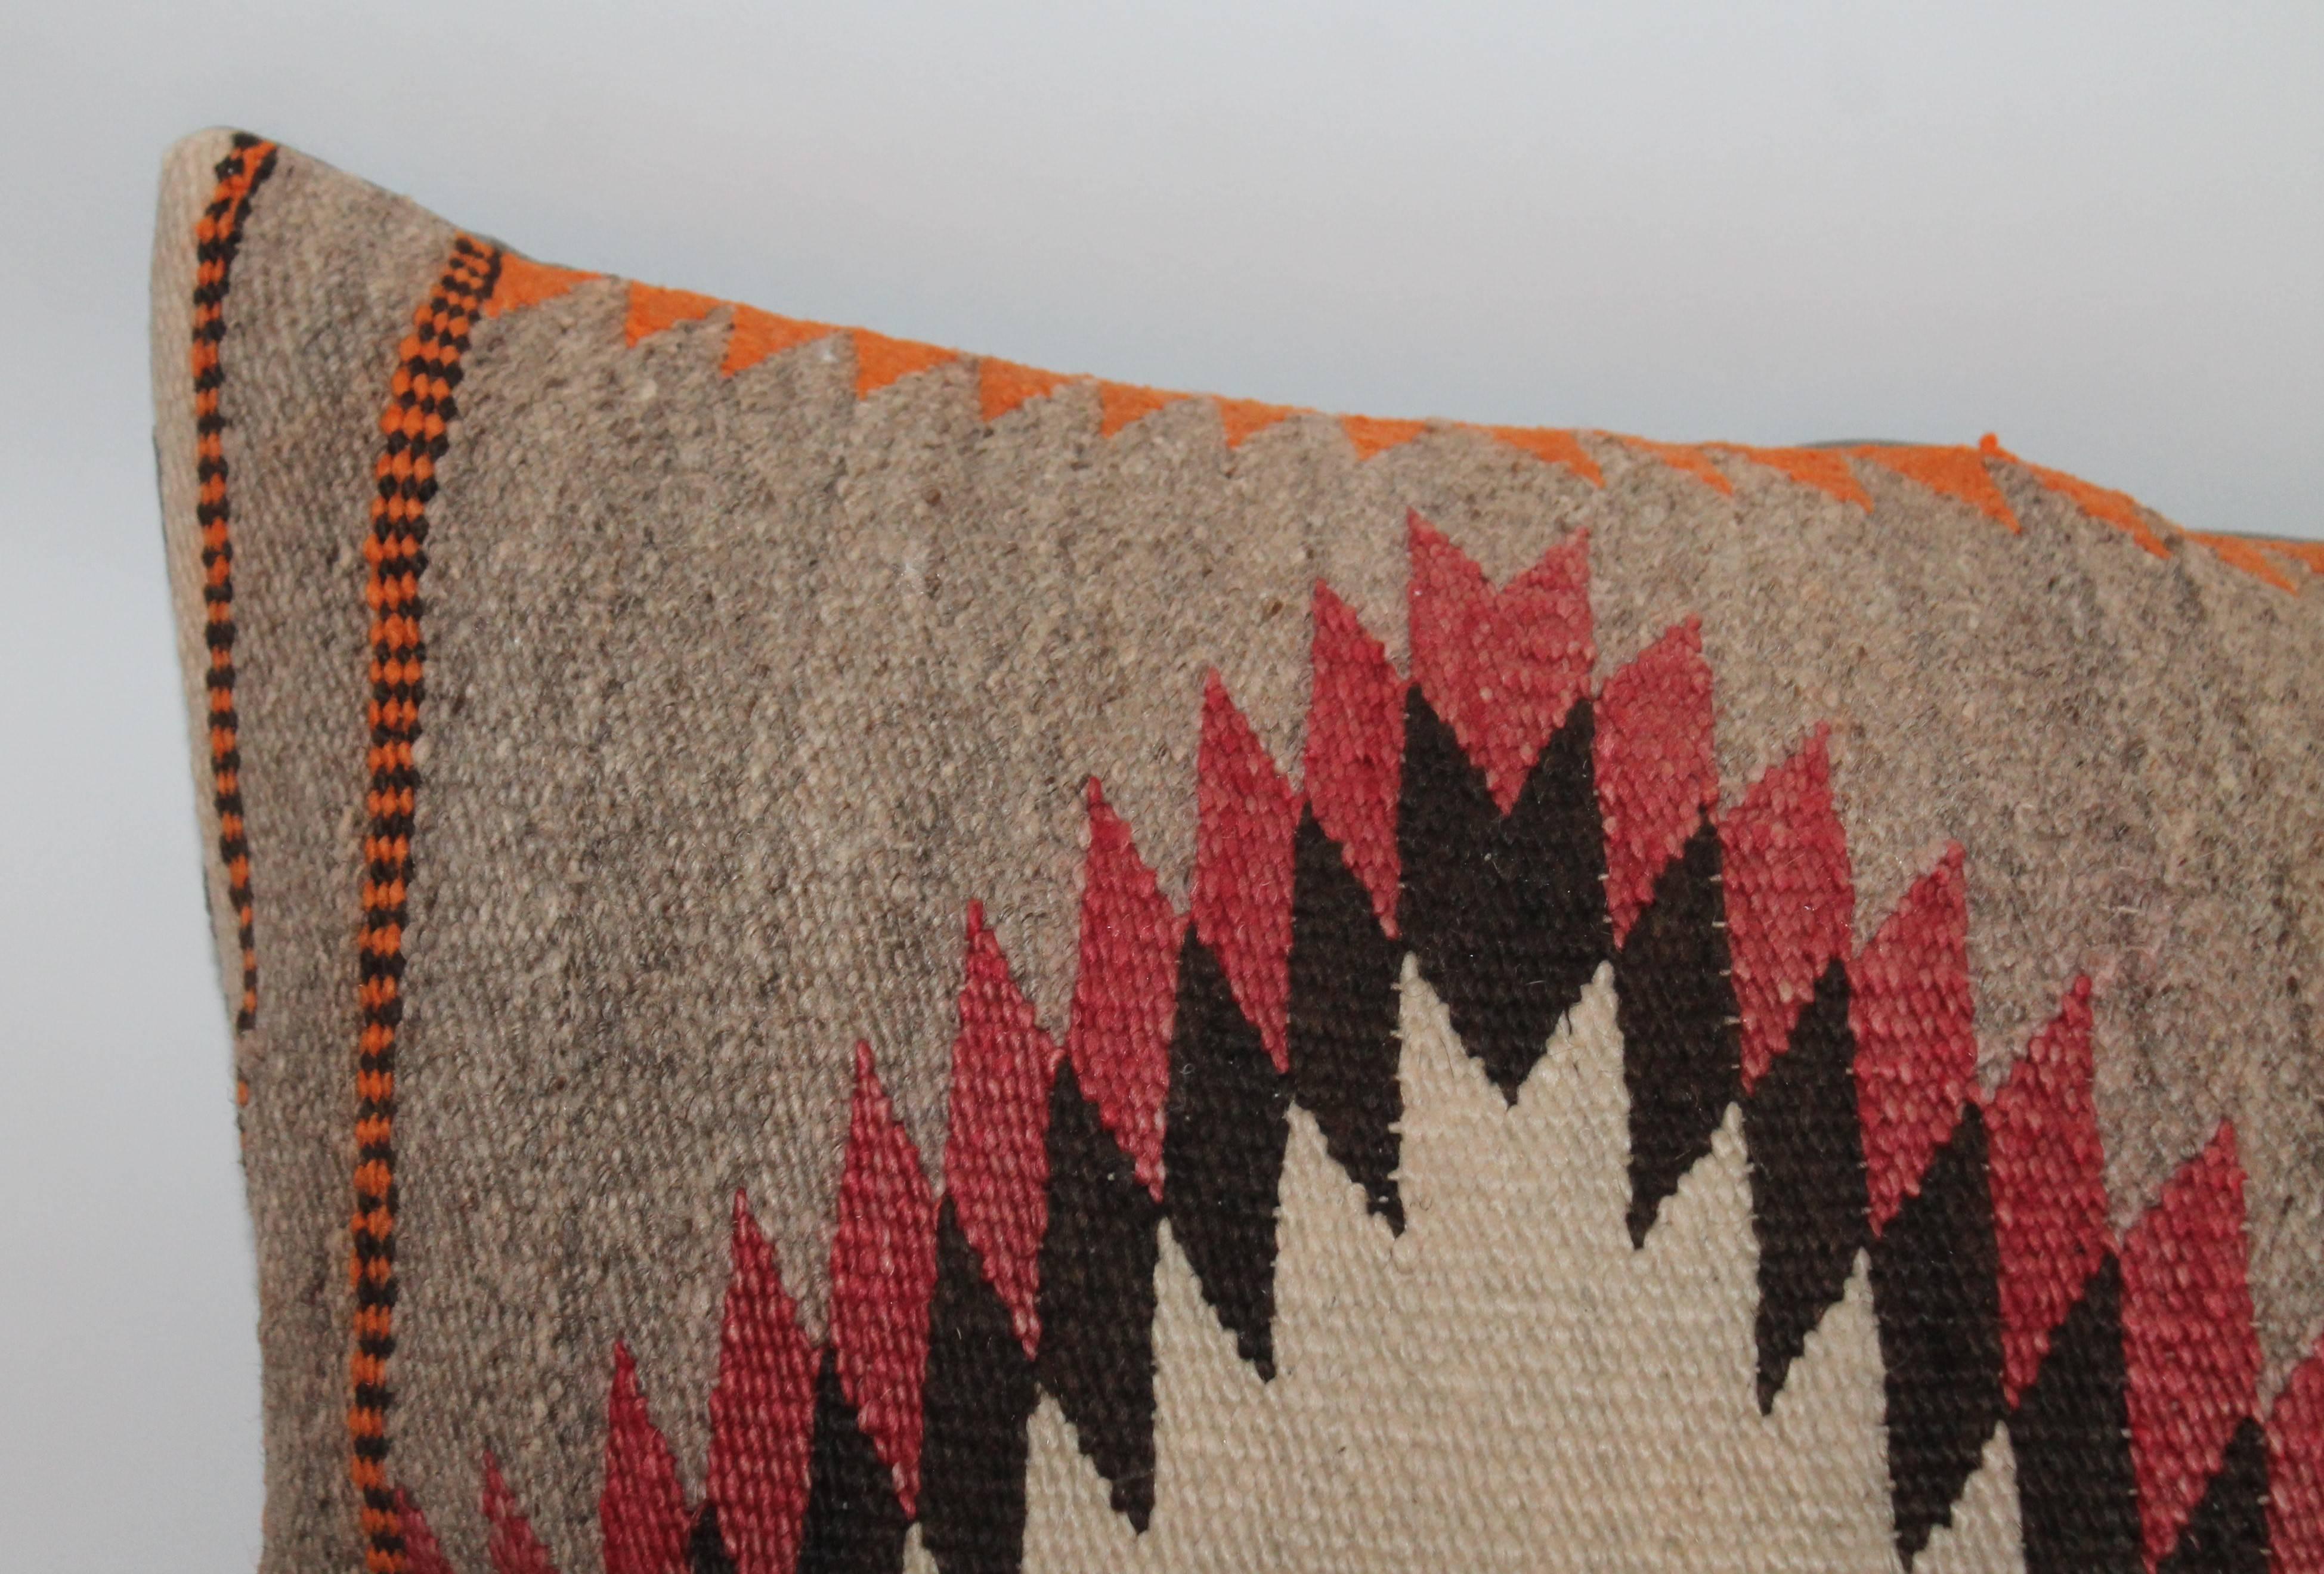 This large Navajo weaving is in fine condition and has a wonderful overall muted or faded look. The backing is in a taupe cotton linen. Great on a large sofa or queen or king bed. This is a large saddle blanket and has not been cut.